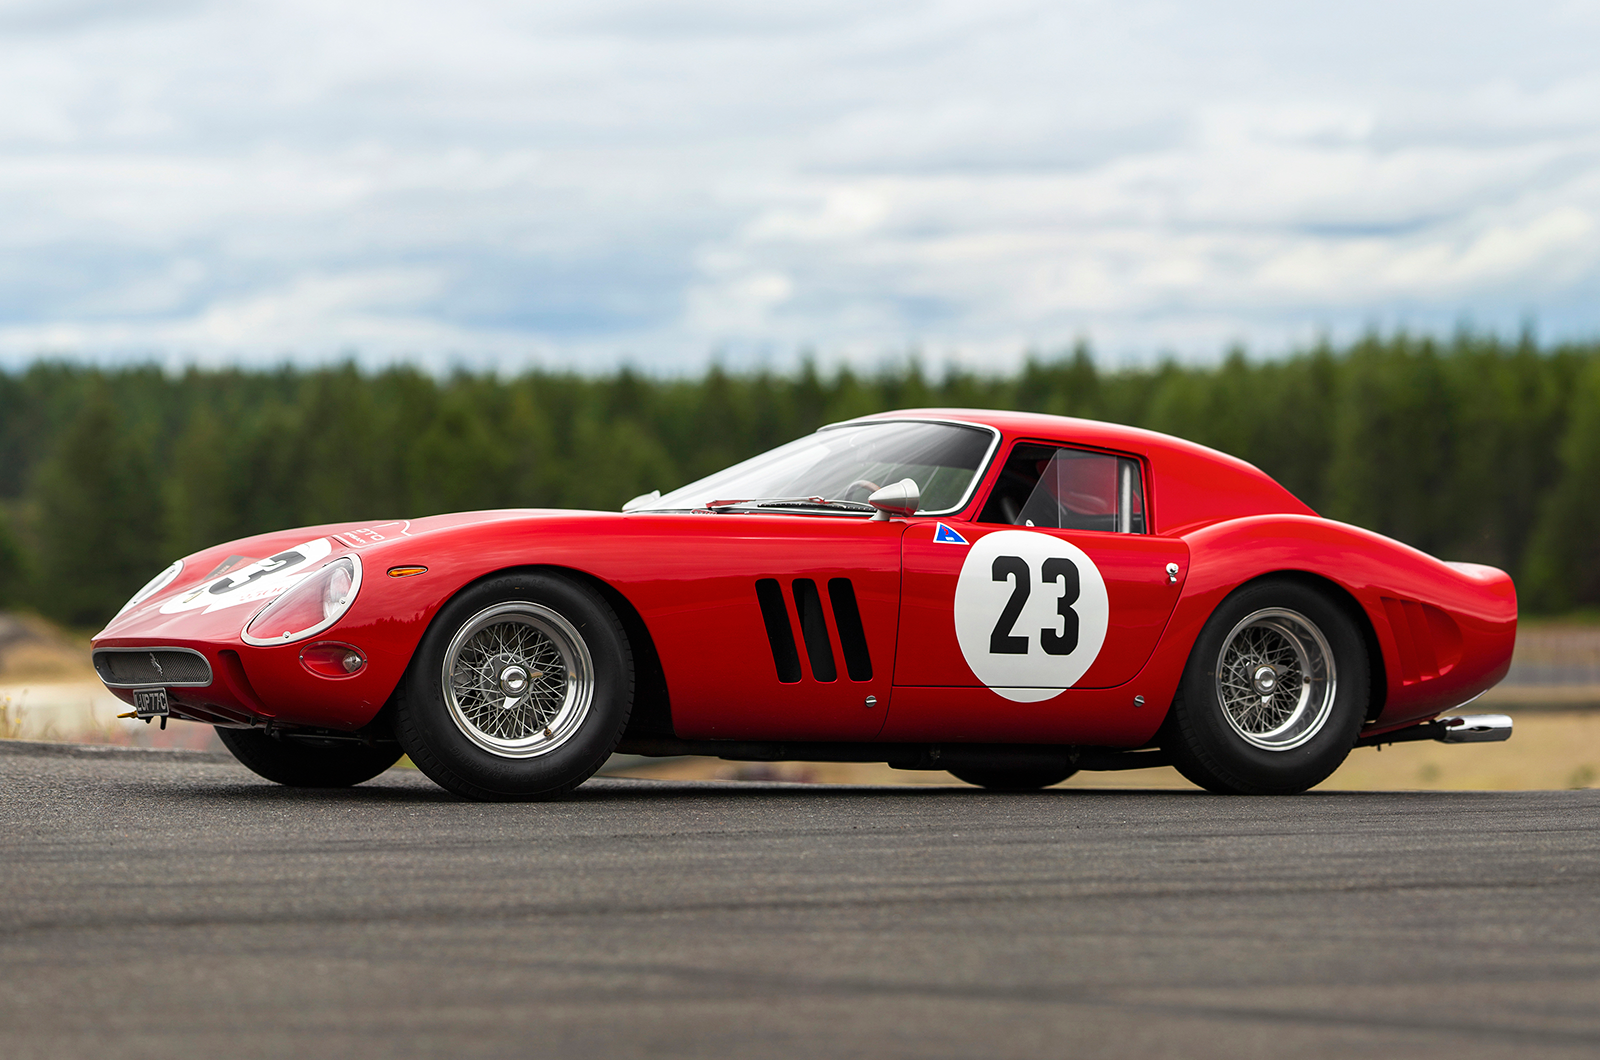 This is the most expensive car to ever go to auction